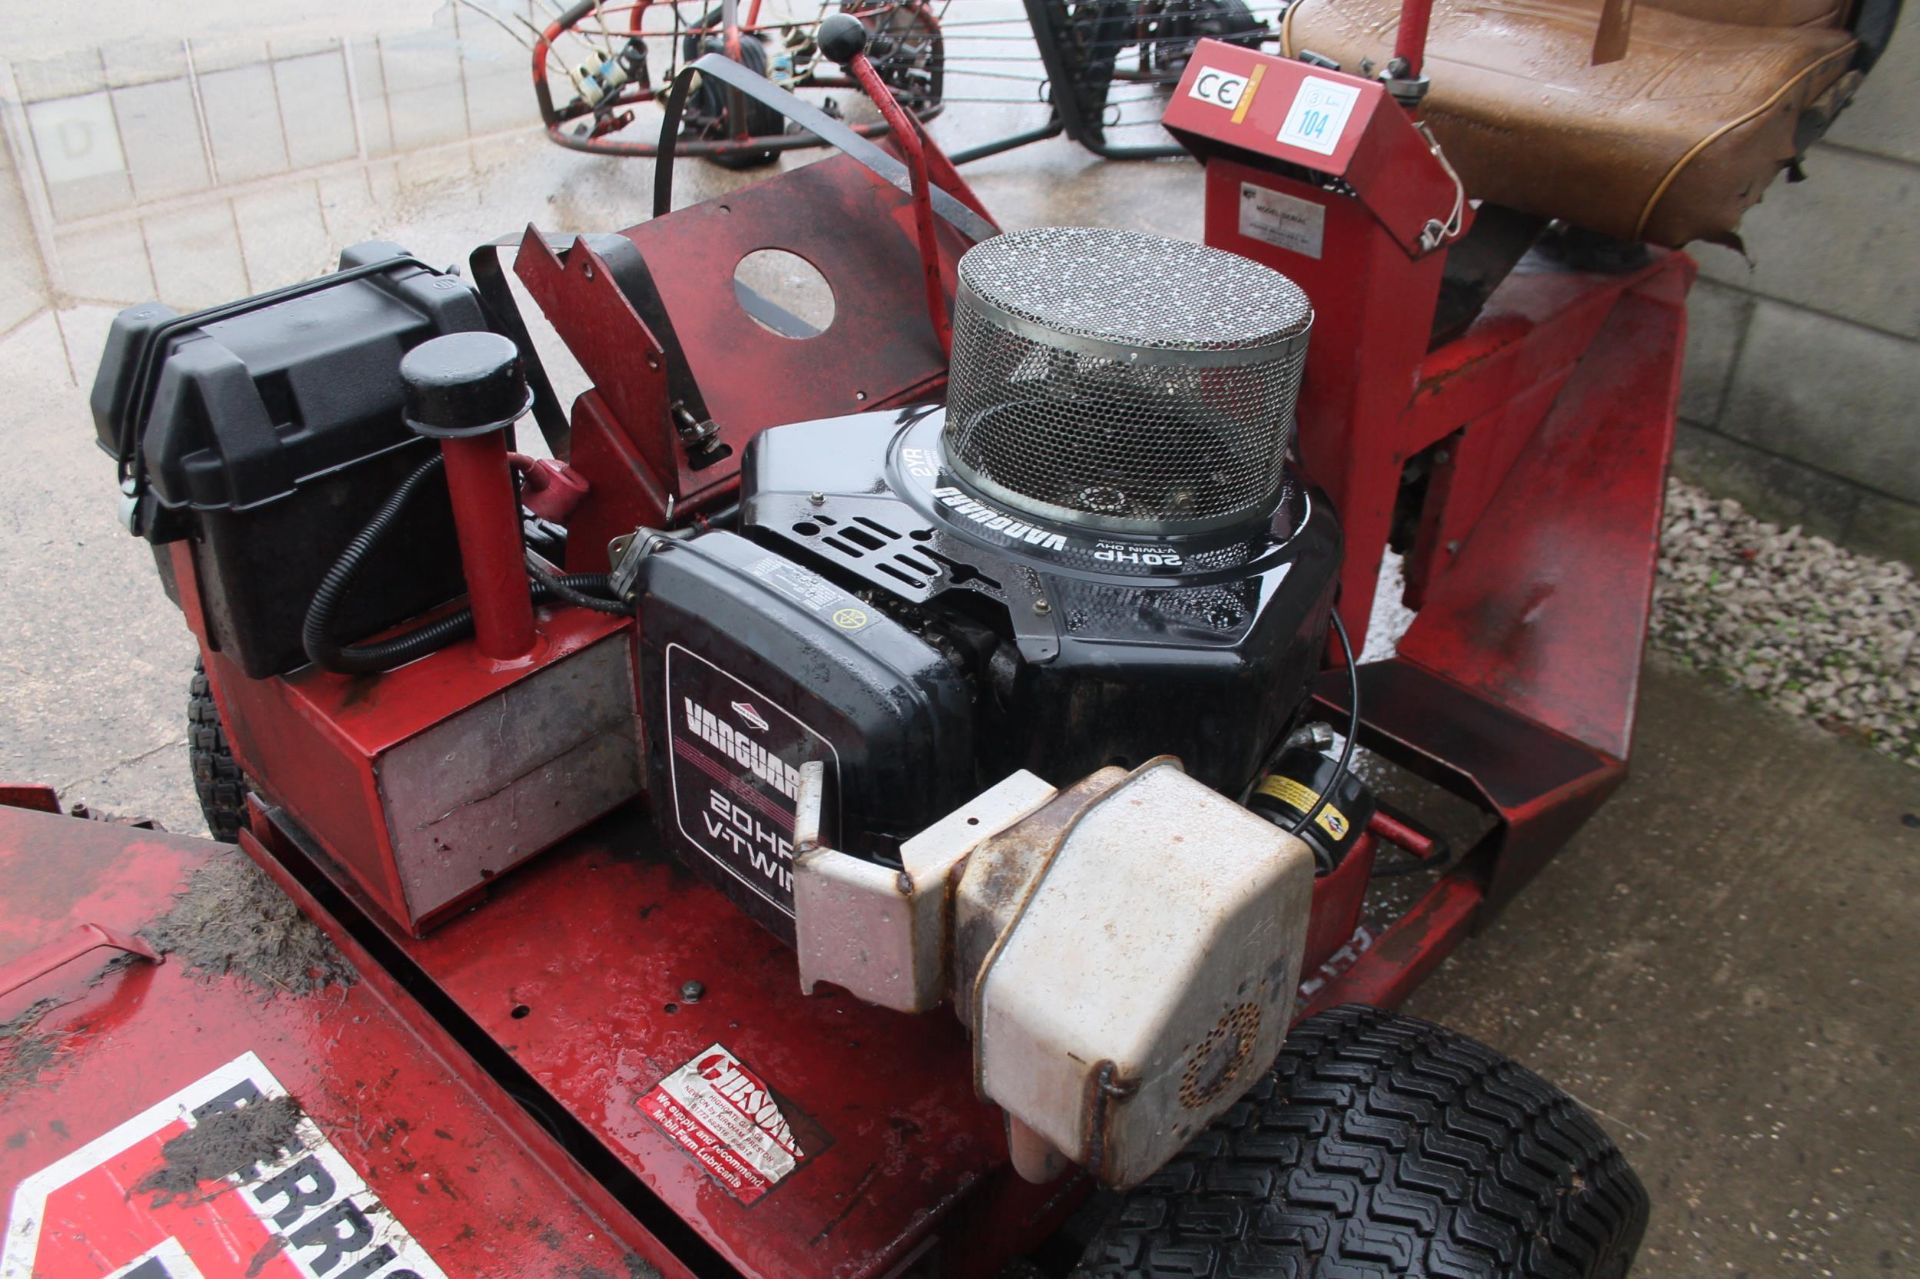 A FERRIS COMMERCIAL PRO-CUT 61 LAWN MOWER WITH A VANGUARD 20HP V-TWIN ENGINE NO VAT - Image 3 of 3